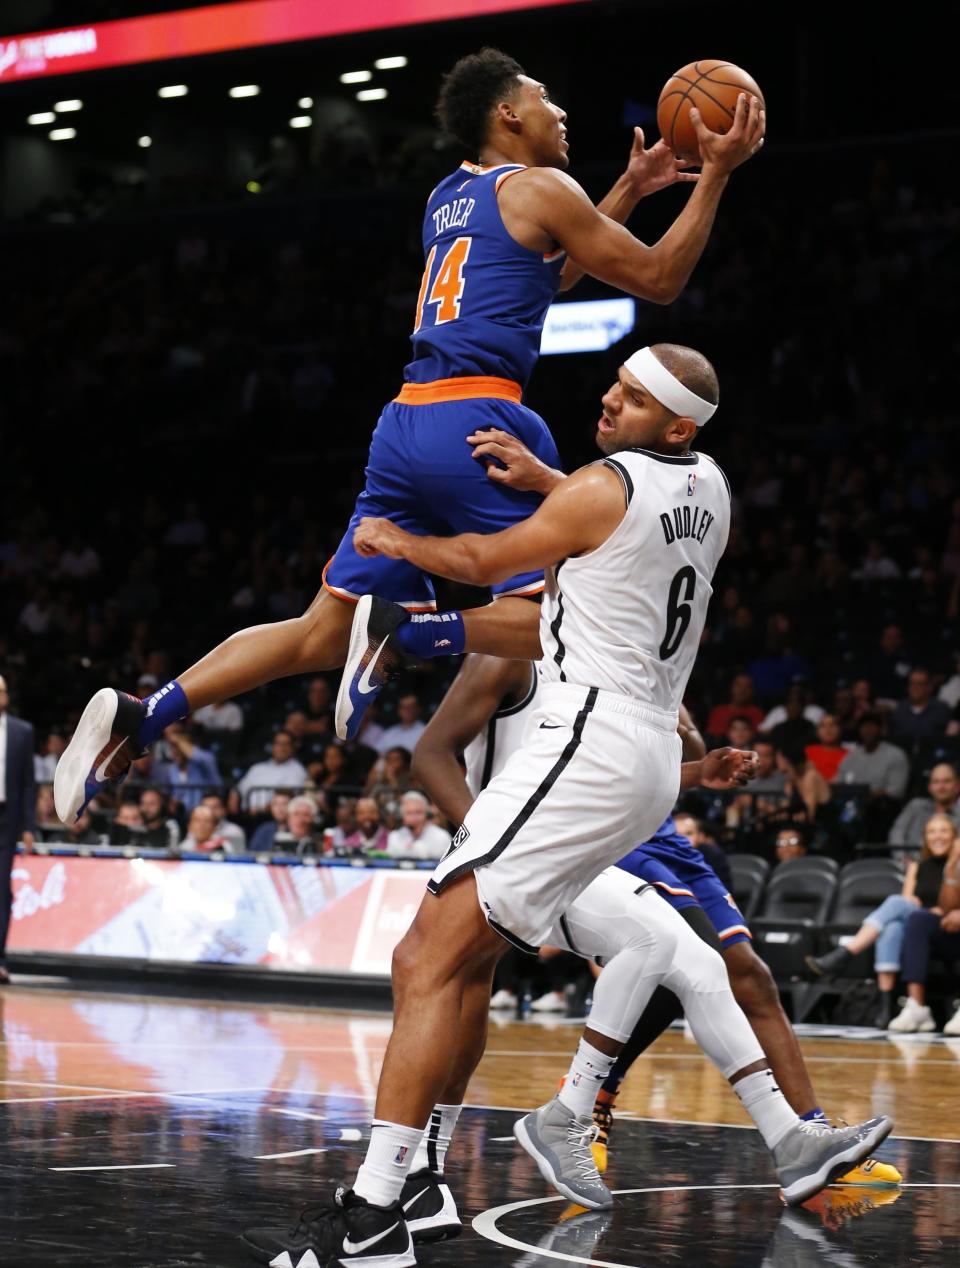 New York Knicks guard Allonzo Trier (14) goes to the basket against Brooklyn Nets forward Jared Dudley (6) during the second half of a preseason NBA basketball game Wednesday, Oct. 3, 2018, in New York. The Knicks won 107-102. (AP Photo/Noah K. Murray)